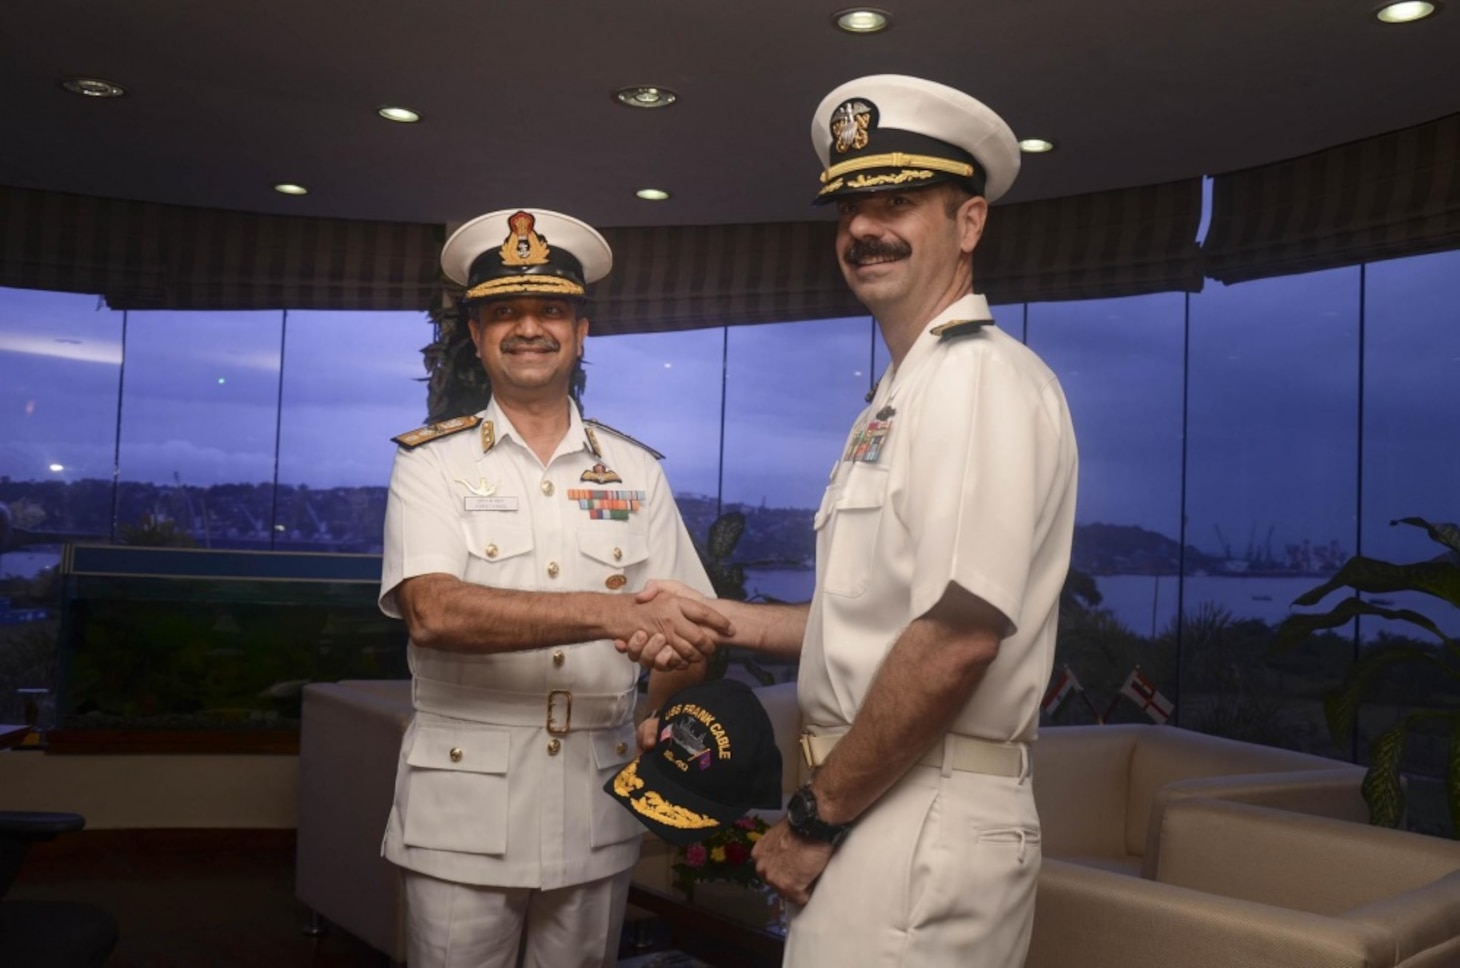 Capt. Drew St. John, commanding officer of the submarine tender USS Frank Cable (AS 40), presents Rear Adm. Puneet Kumar Bahl, Flag Officer Naval Aviation, Flag Officer Goa Area, with a decorated Navy ball cap for his appreciation for a continuation of positive relations between the U.S. and Indian Navy, July 29. The visit to Goa is aimed at building friendship and goodwill between the U.S. Navy and the People of India. Frank Cable is one of two forward-deployed U.S. naval force submarines and surface vessels in the Indo-Asia-Pacific region.